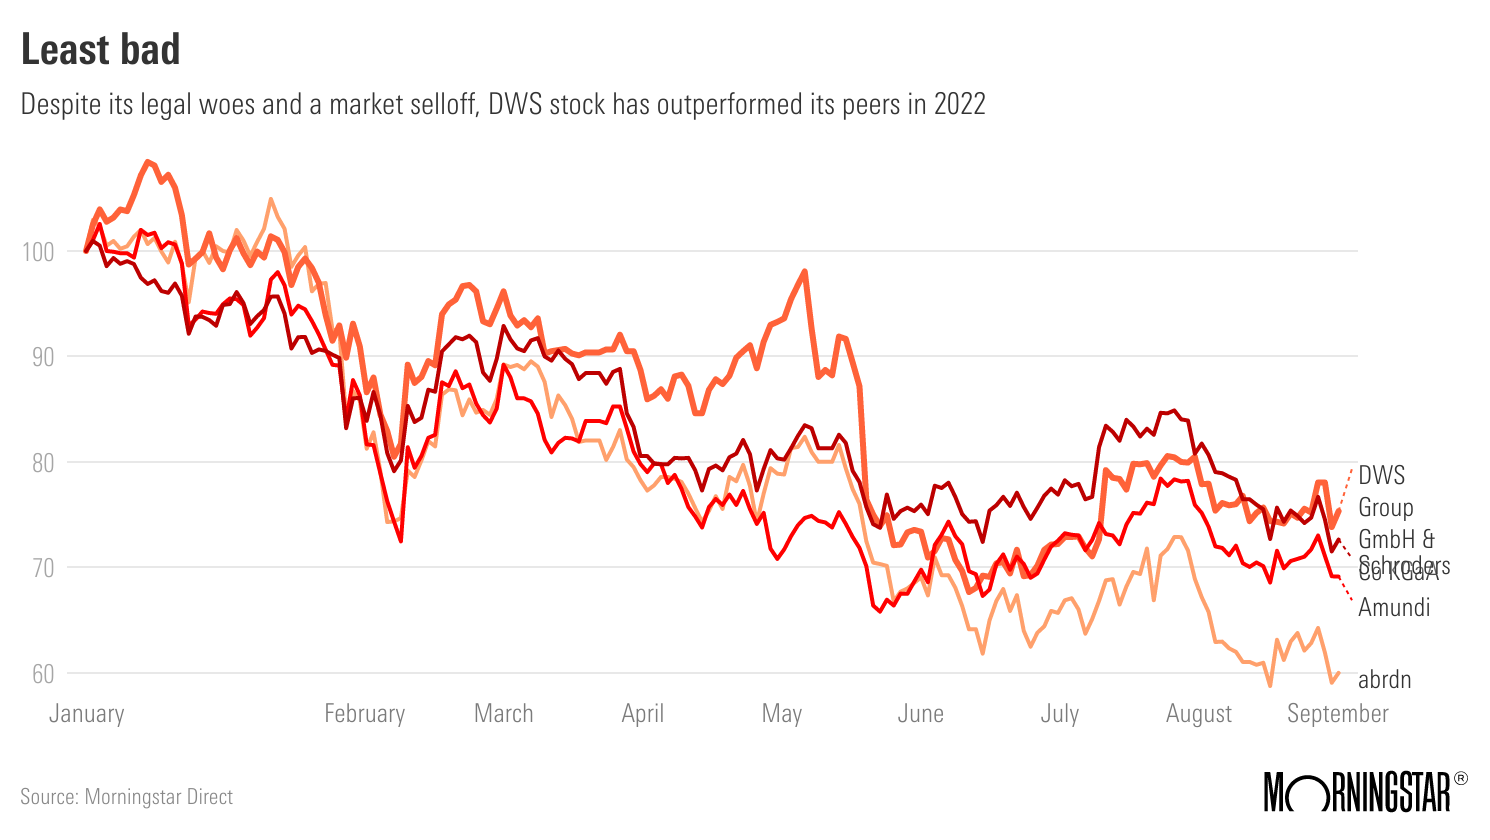 "DWS stock performance in 2022."